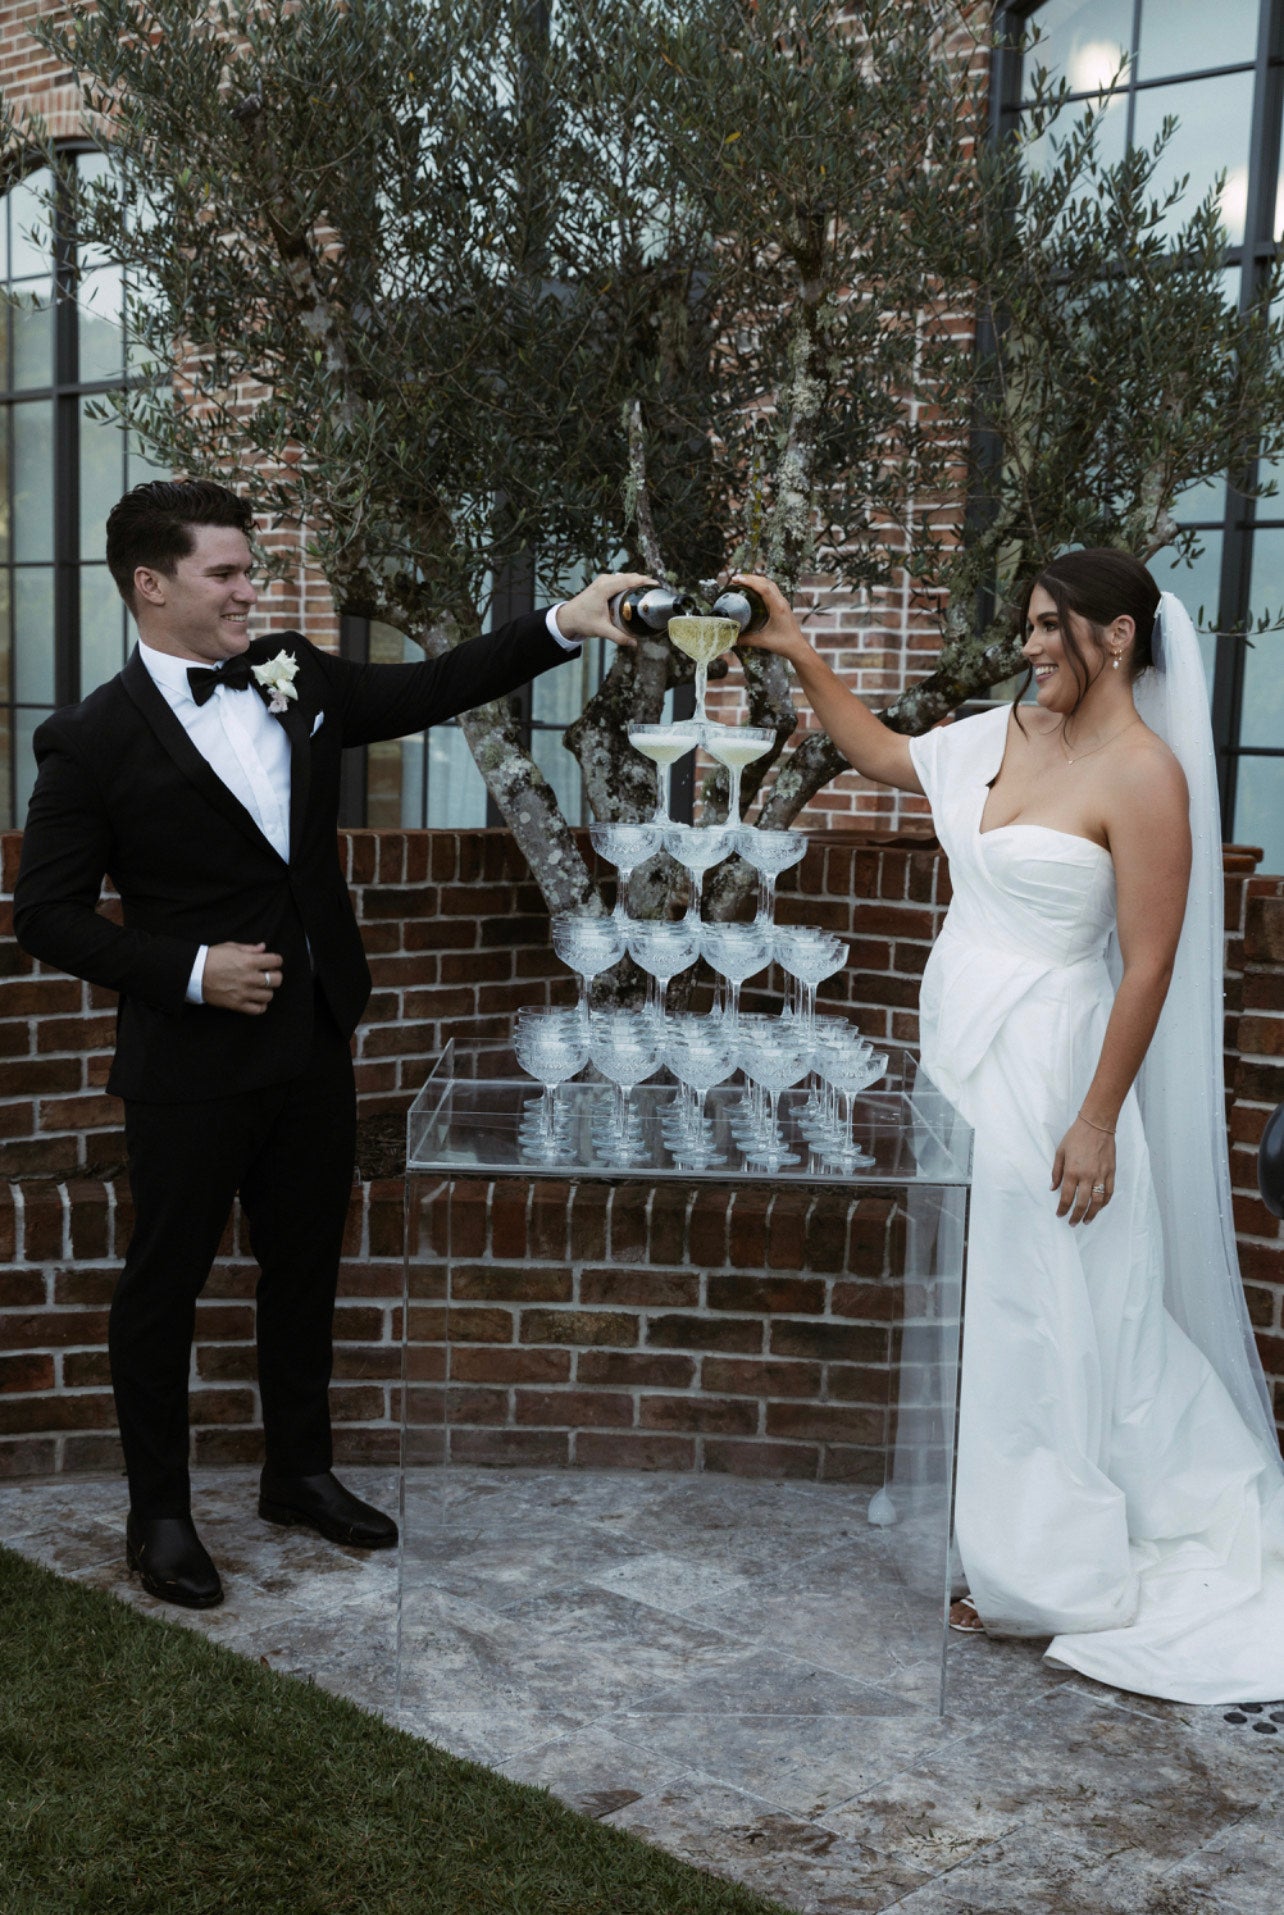 Champagne Tower For Hire | For Love & Living Gold Coast Weddings & Events